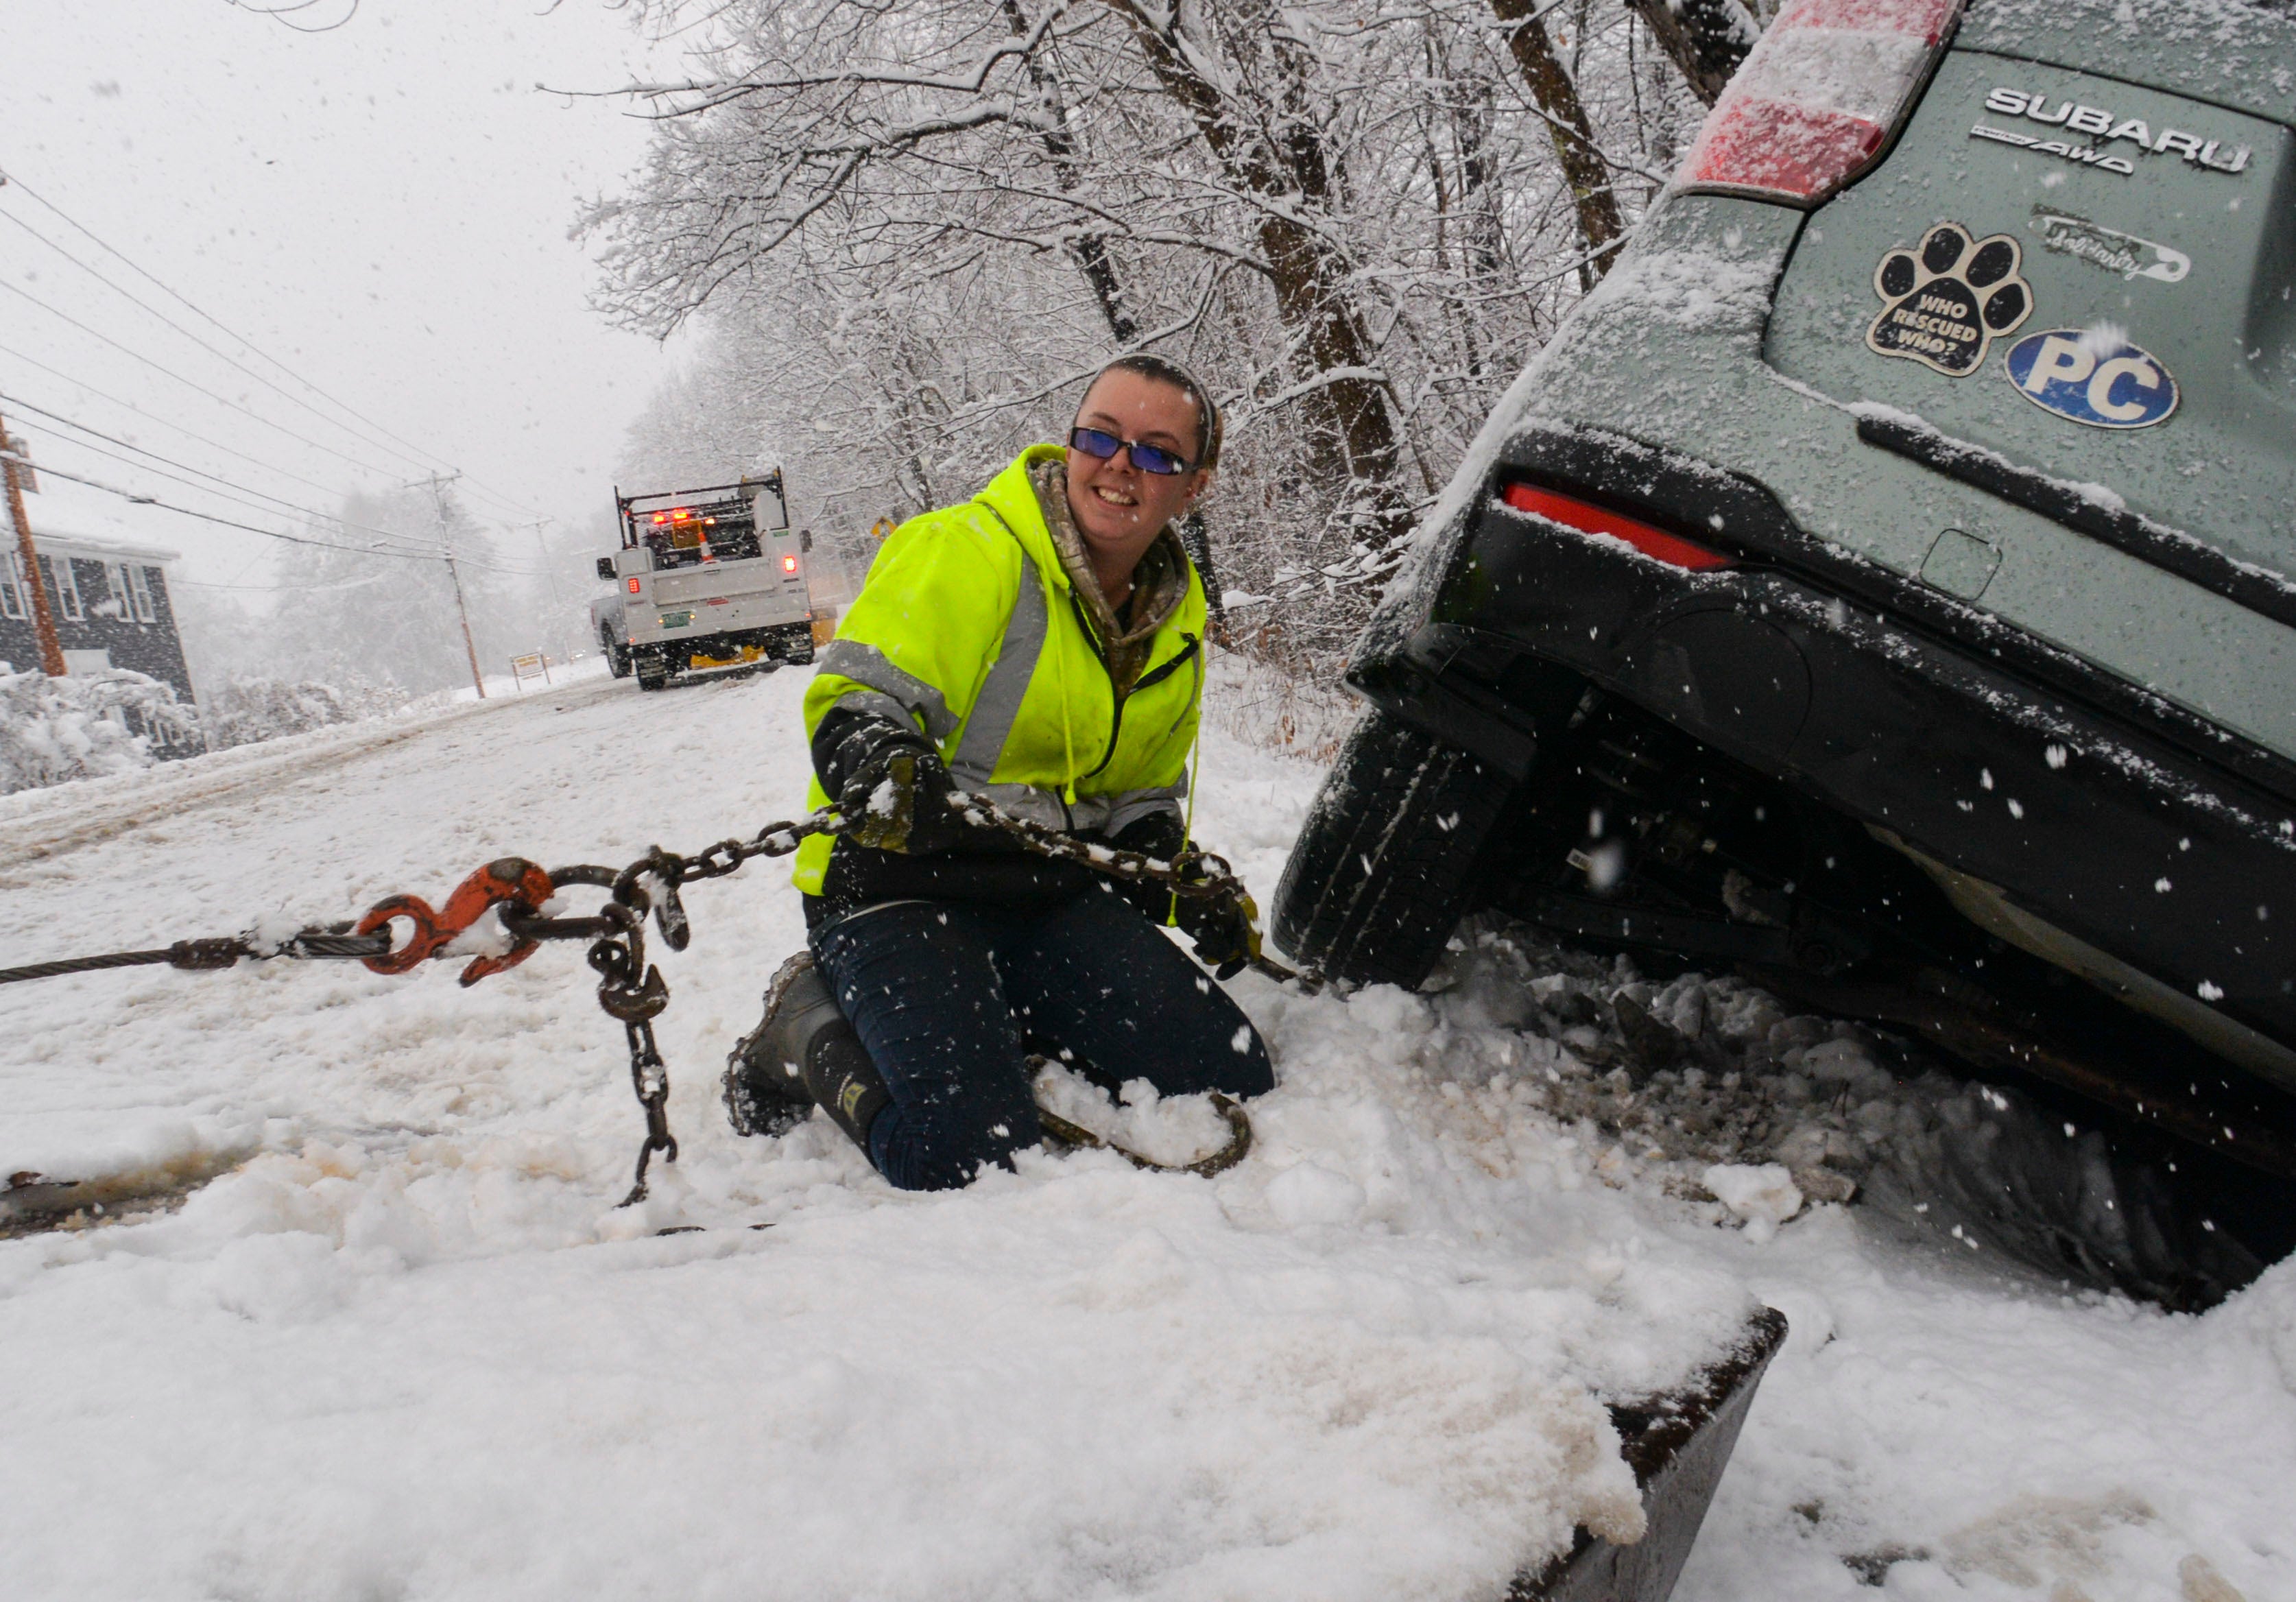 Brianna Brooks, owner of Scott Brooks Towing out of Townshend, Vermont, hooks up a vehicle to a flatbed truck at a three-vehicle crash site during a snowstorm on Friday, Dec. 16, 2022. (Kristopher Radder/The Brattleboro Reformer via AP)